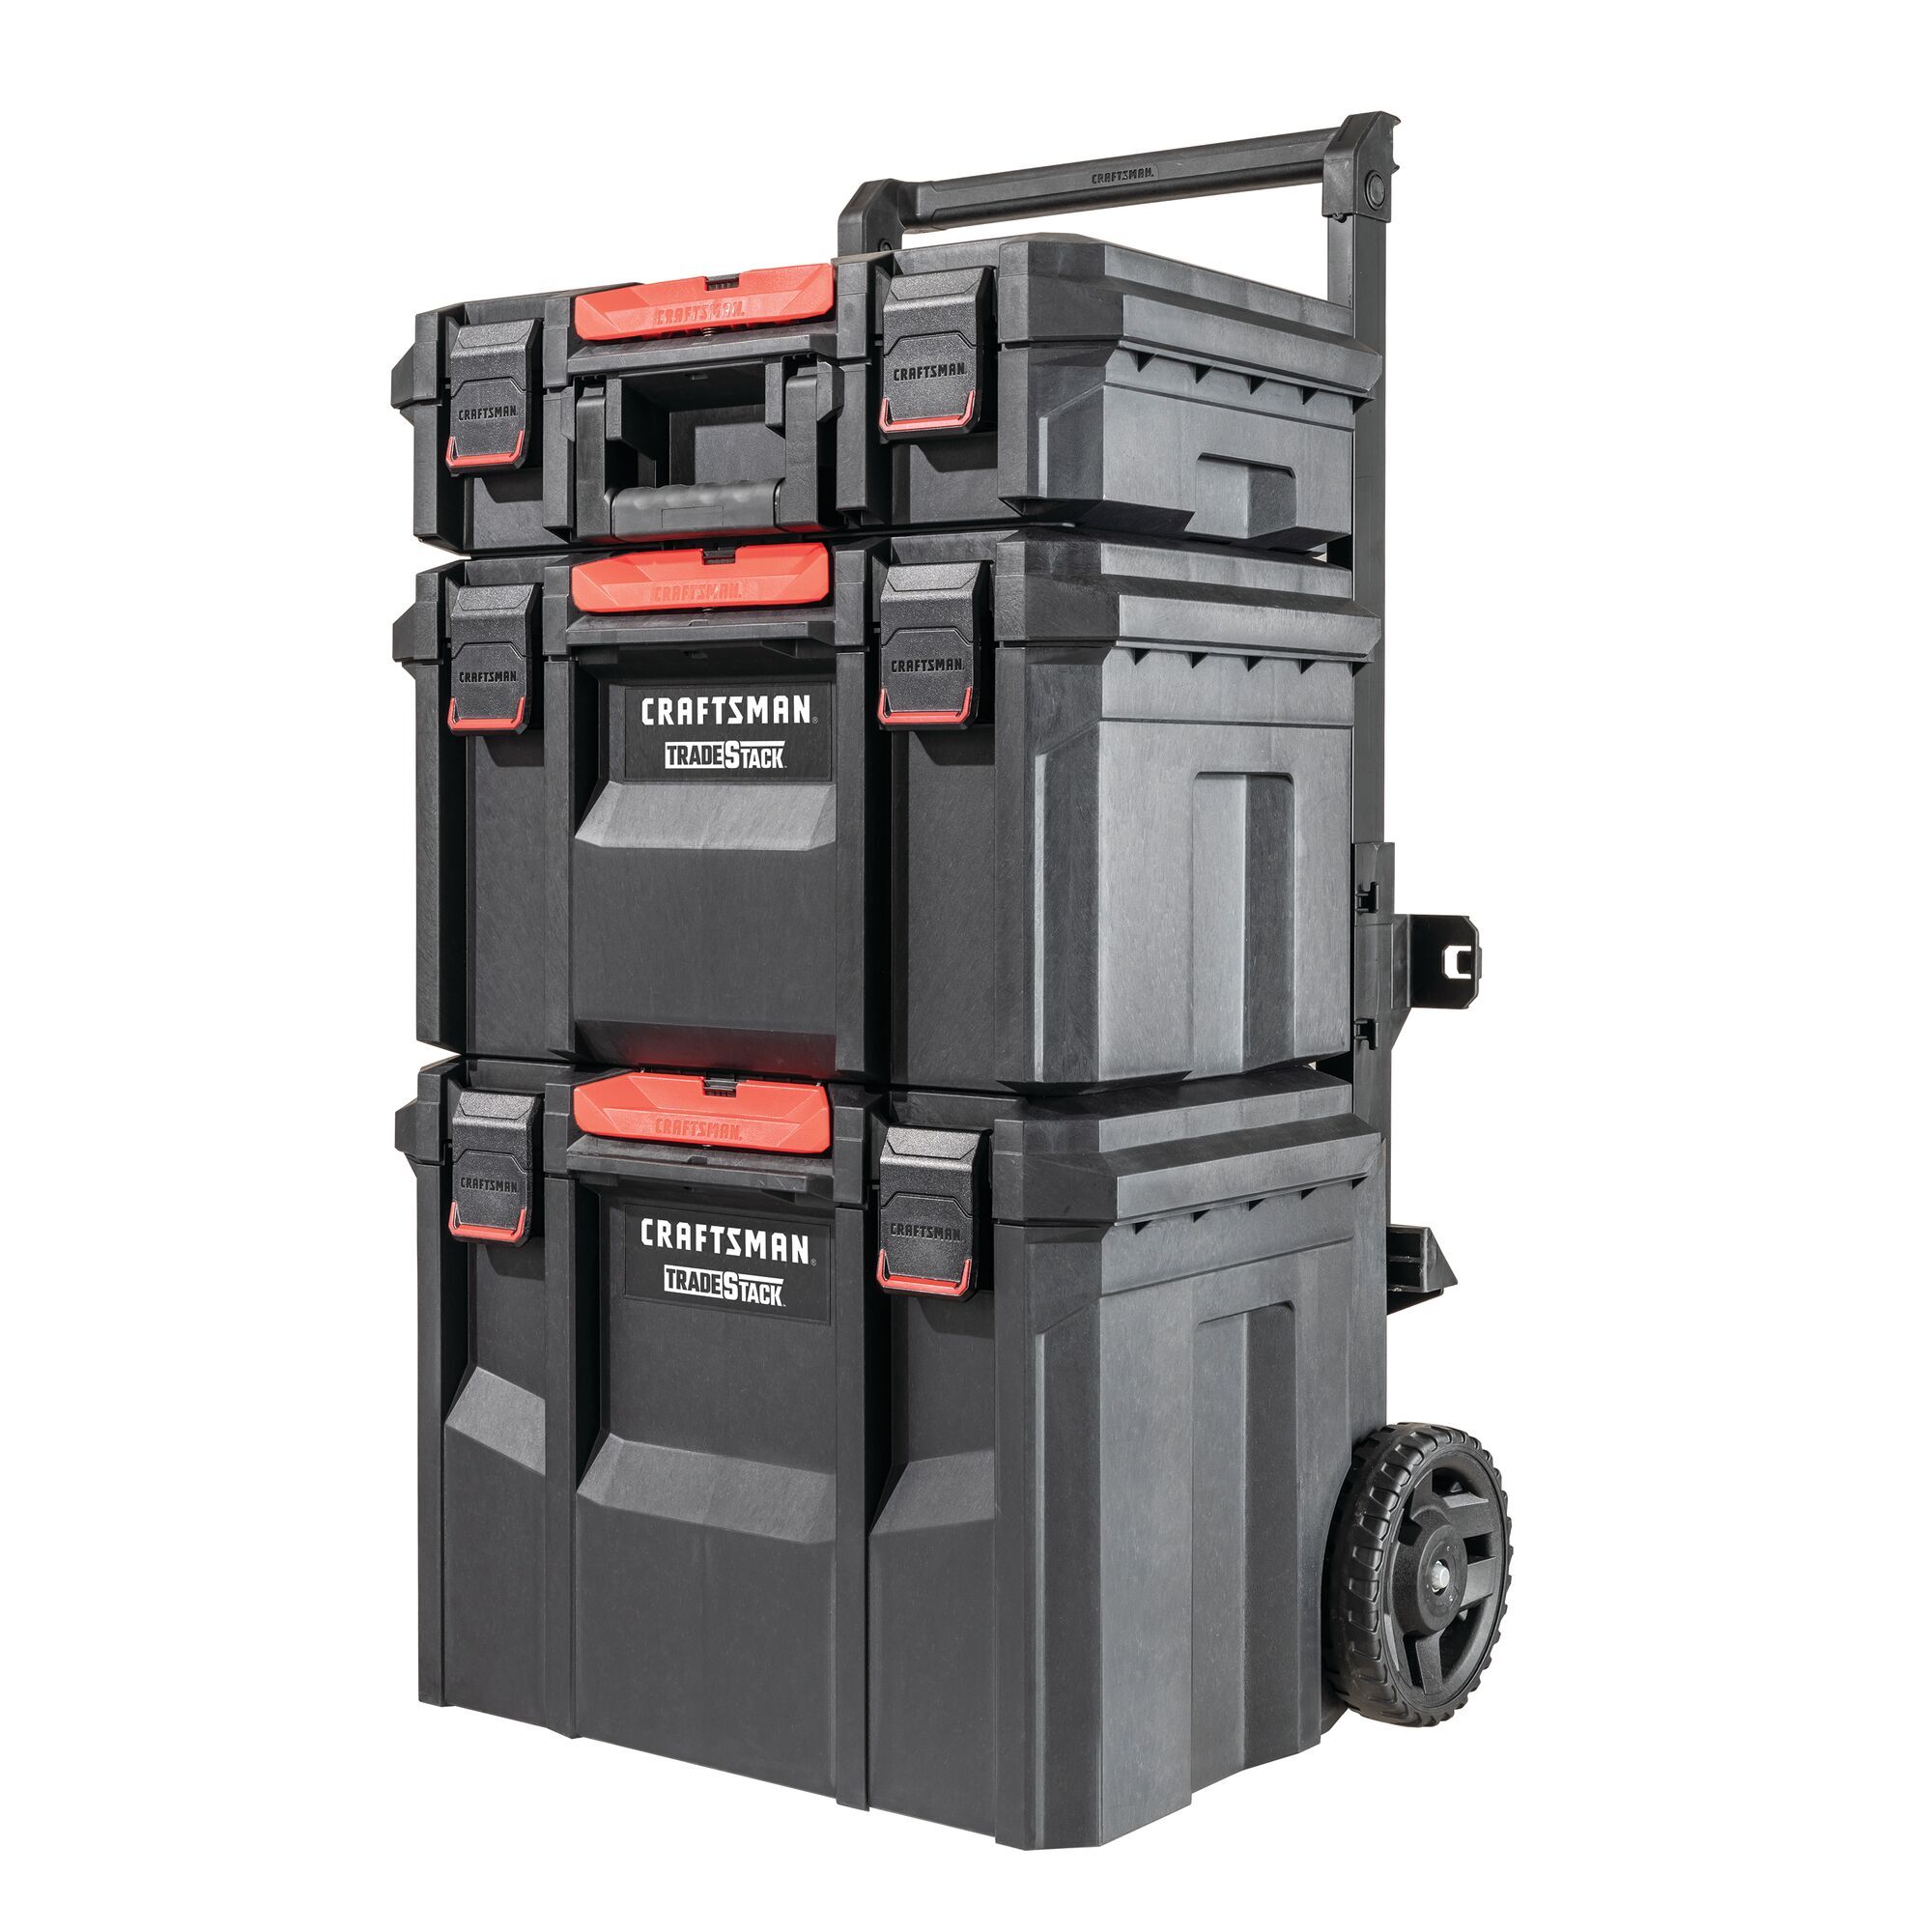 View of CRAFTSMAN Storage: Tradesystem family of products